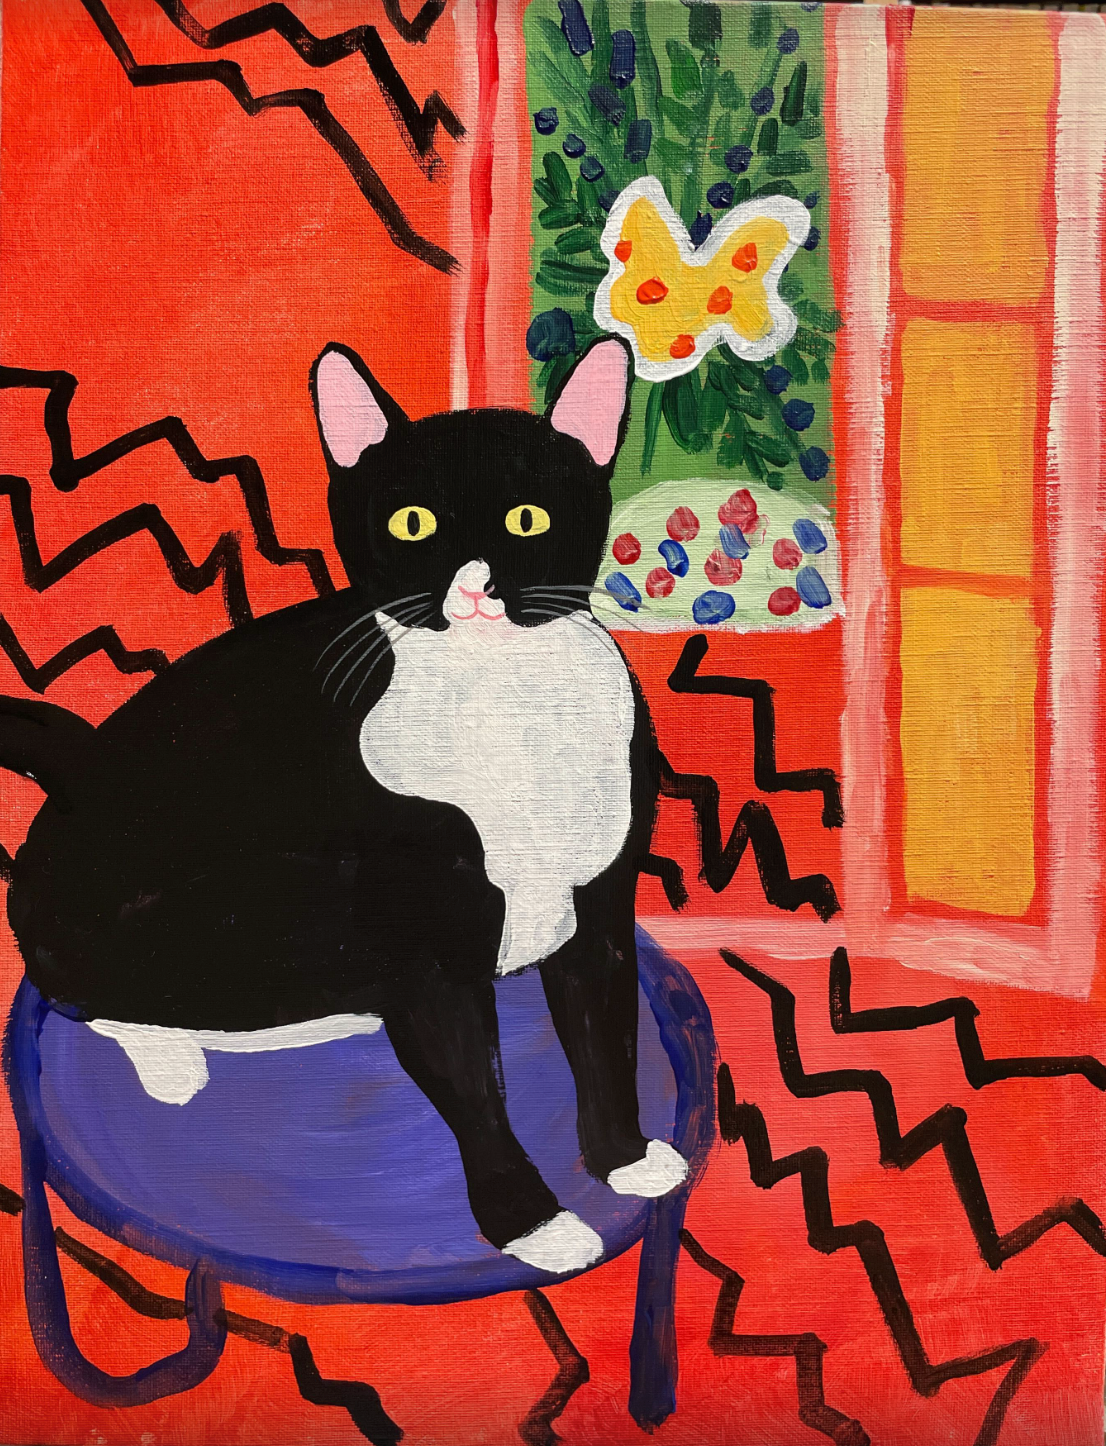 [Hiroo Eat Play Works 3F] Friday, December 8th 20:00-22:30 | Matisse-Style Animal Painting at Hiroo